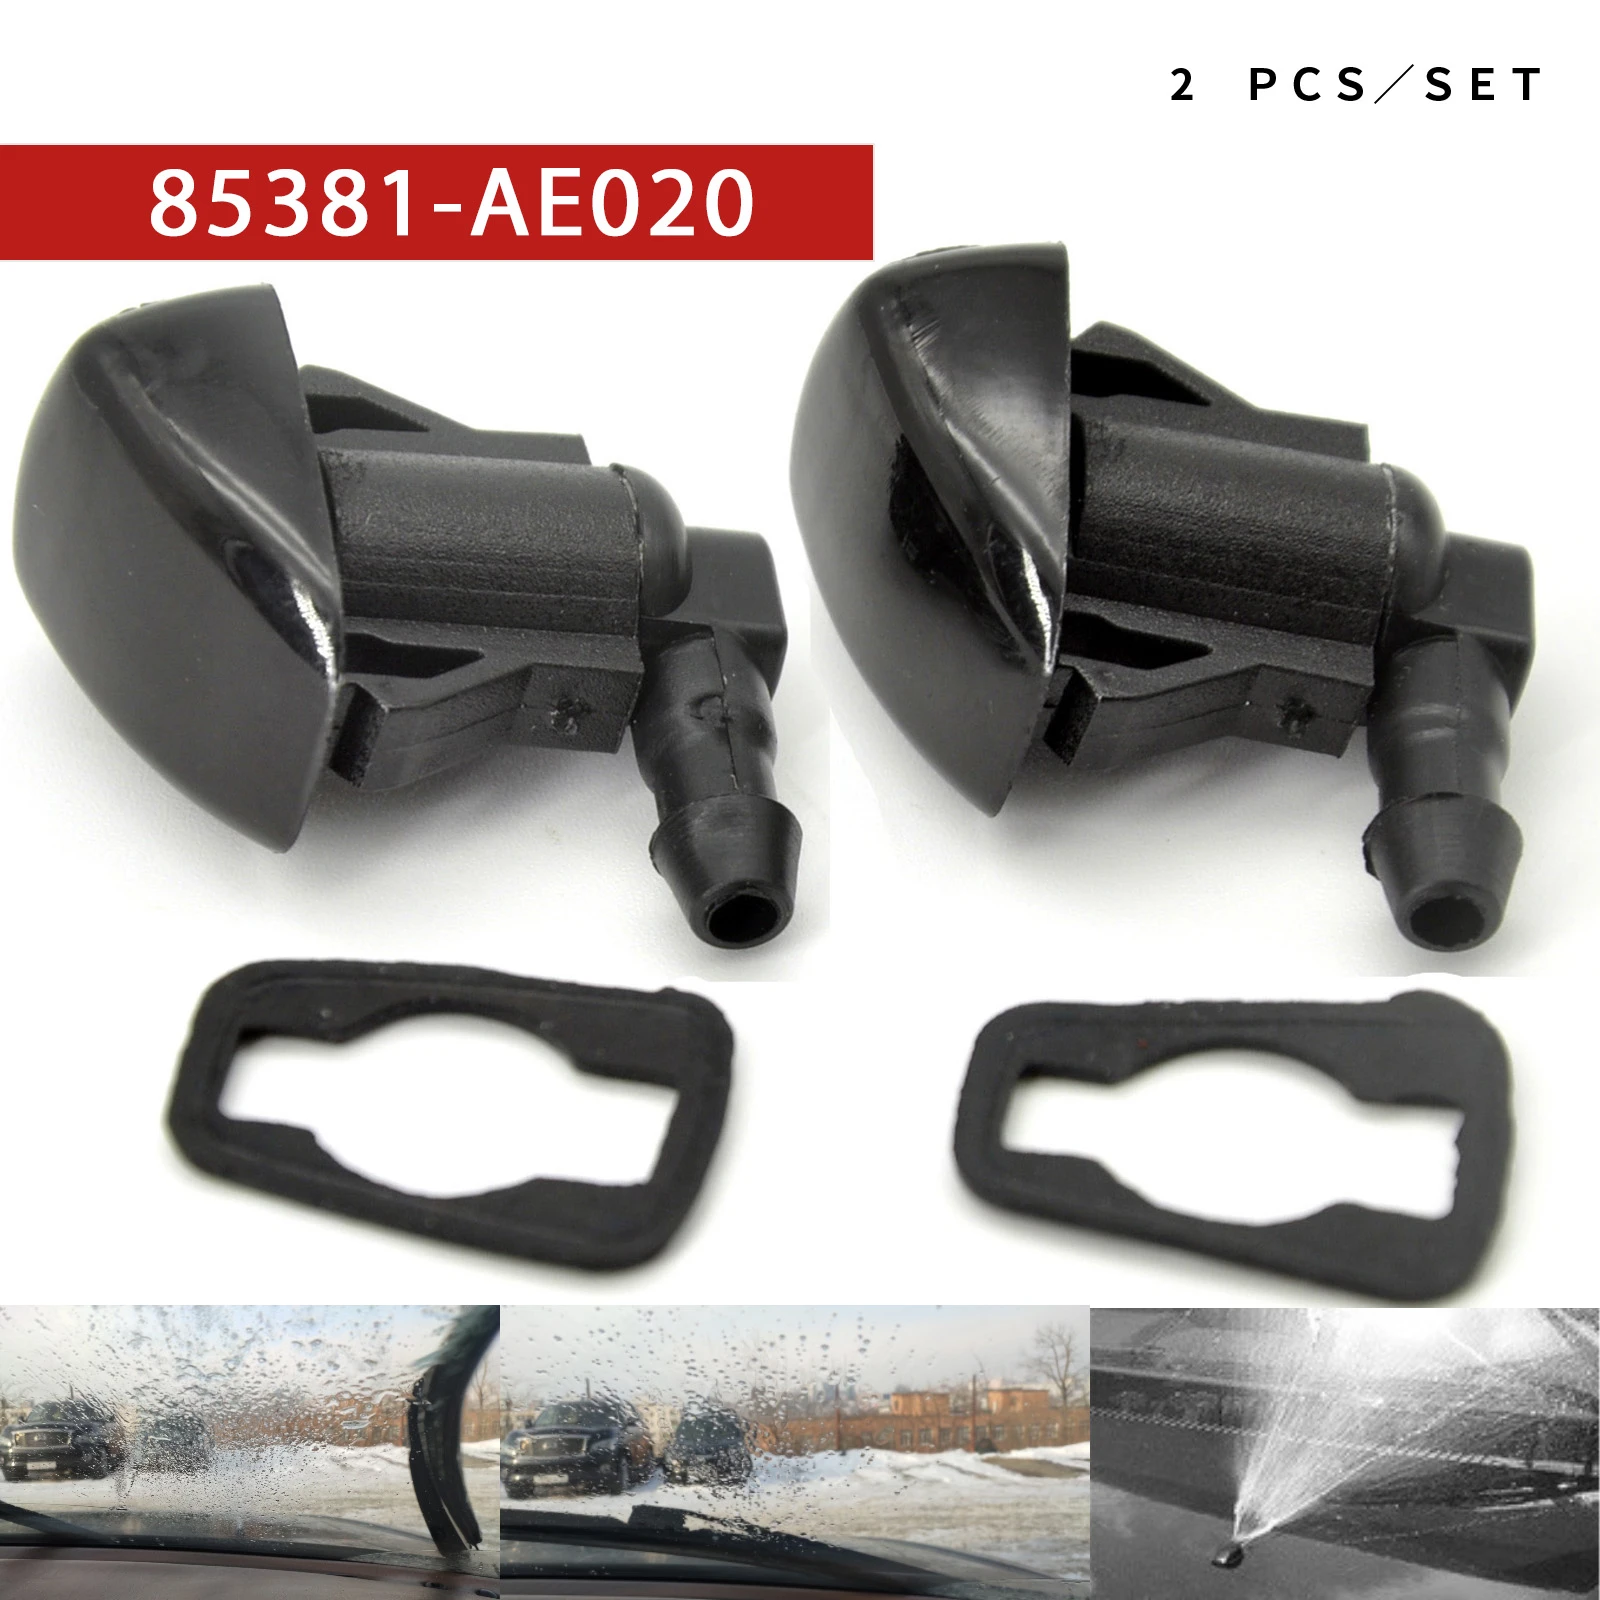 2pcs Windshield Wiper Spray Jet Washer Nozzle for Toyota Camry Sienna Corolla Tundra Avensis Water Spray Nozzles OE# 85381-ae020